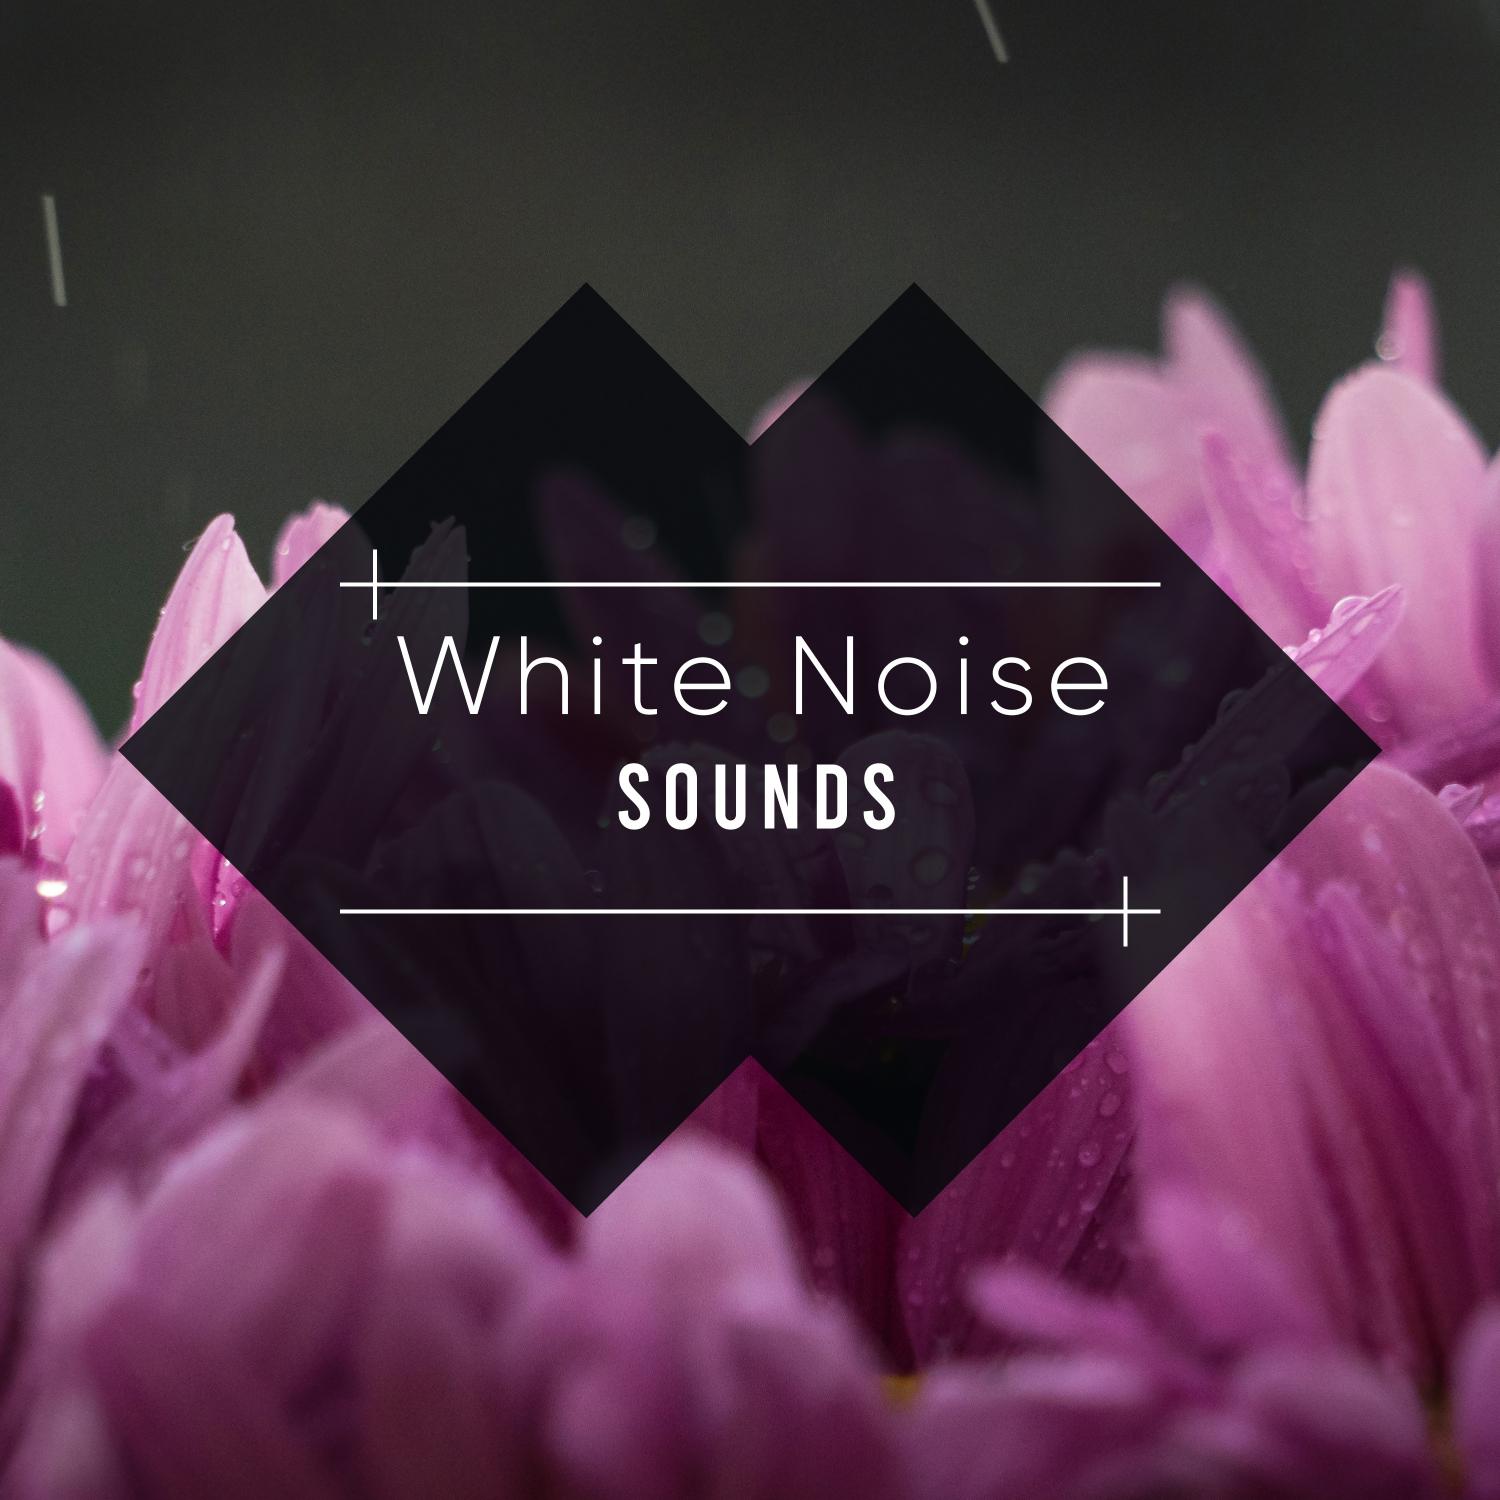 12 Spa White Noise Sounds to Loop, Unwind and Relax